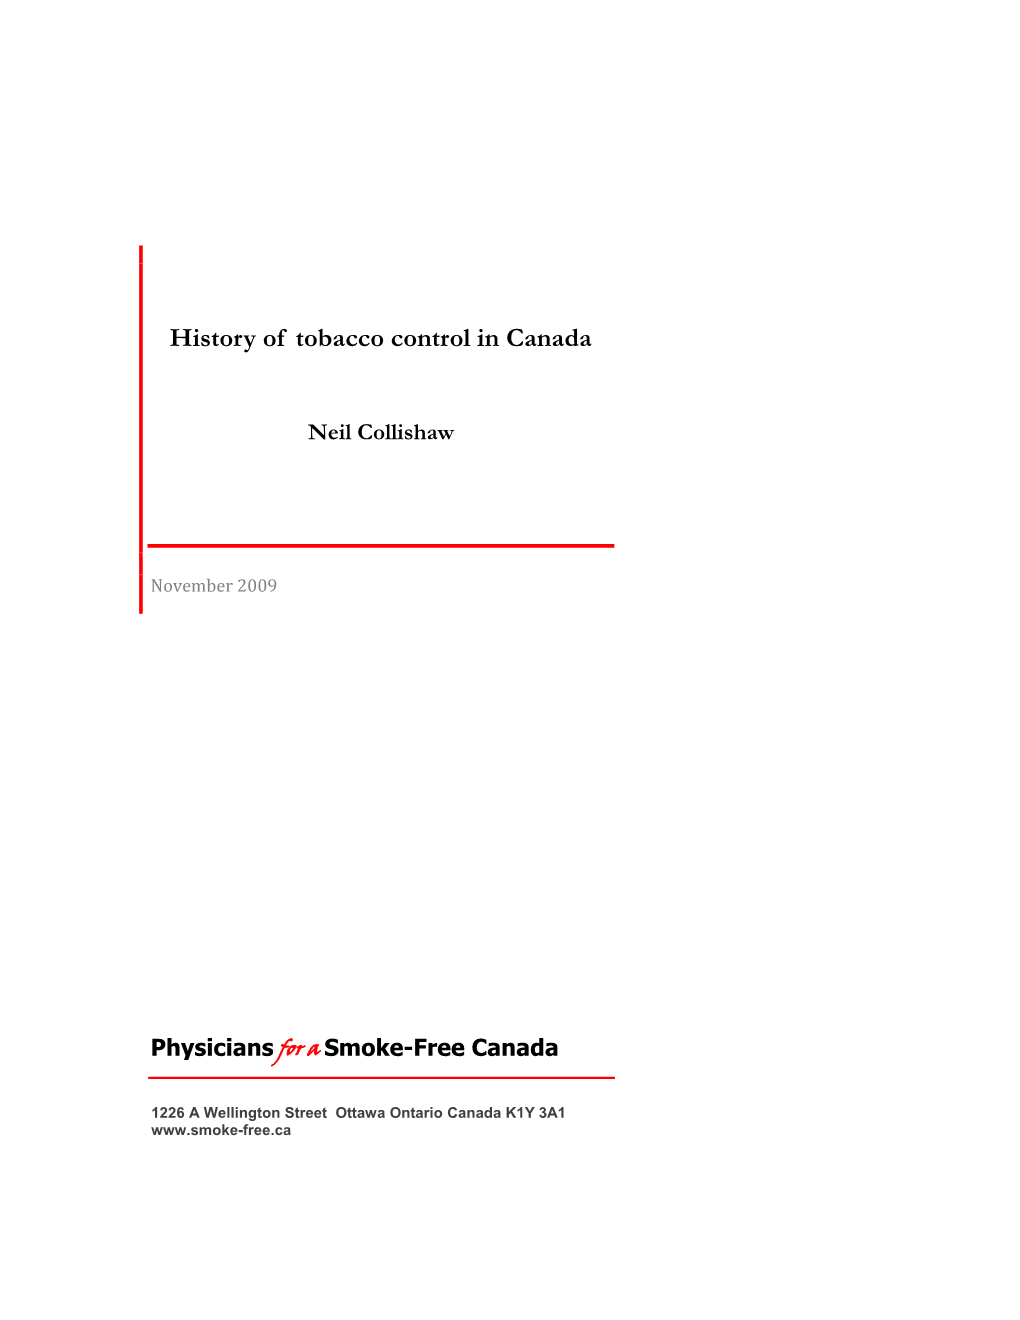 History of Tobacco Control in Canada